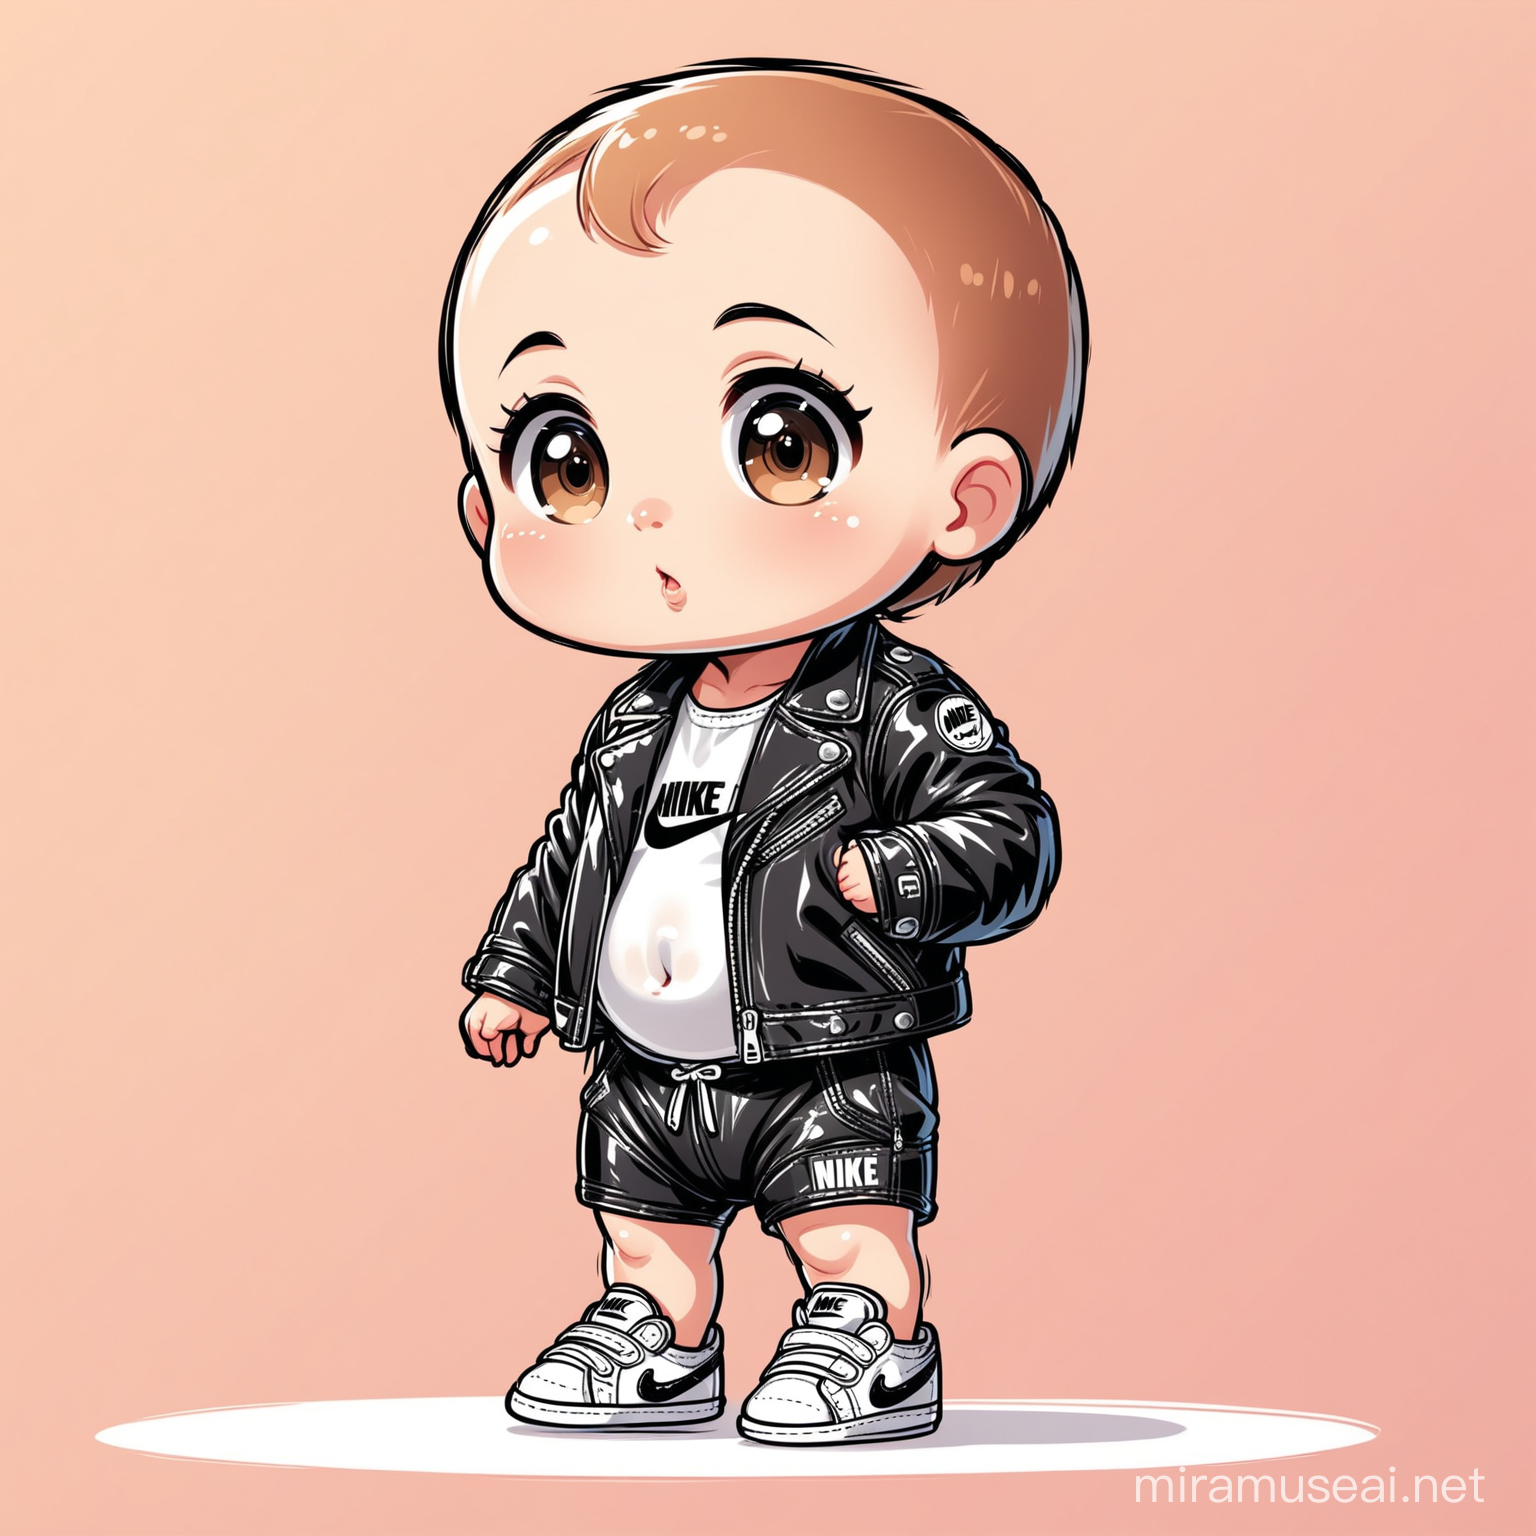 Adorable Cartoon Baby in Leather Jacket and Sneakers